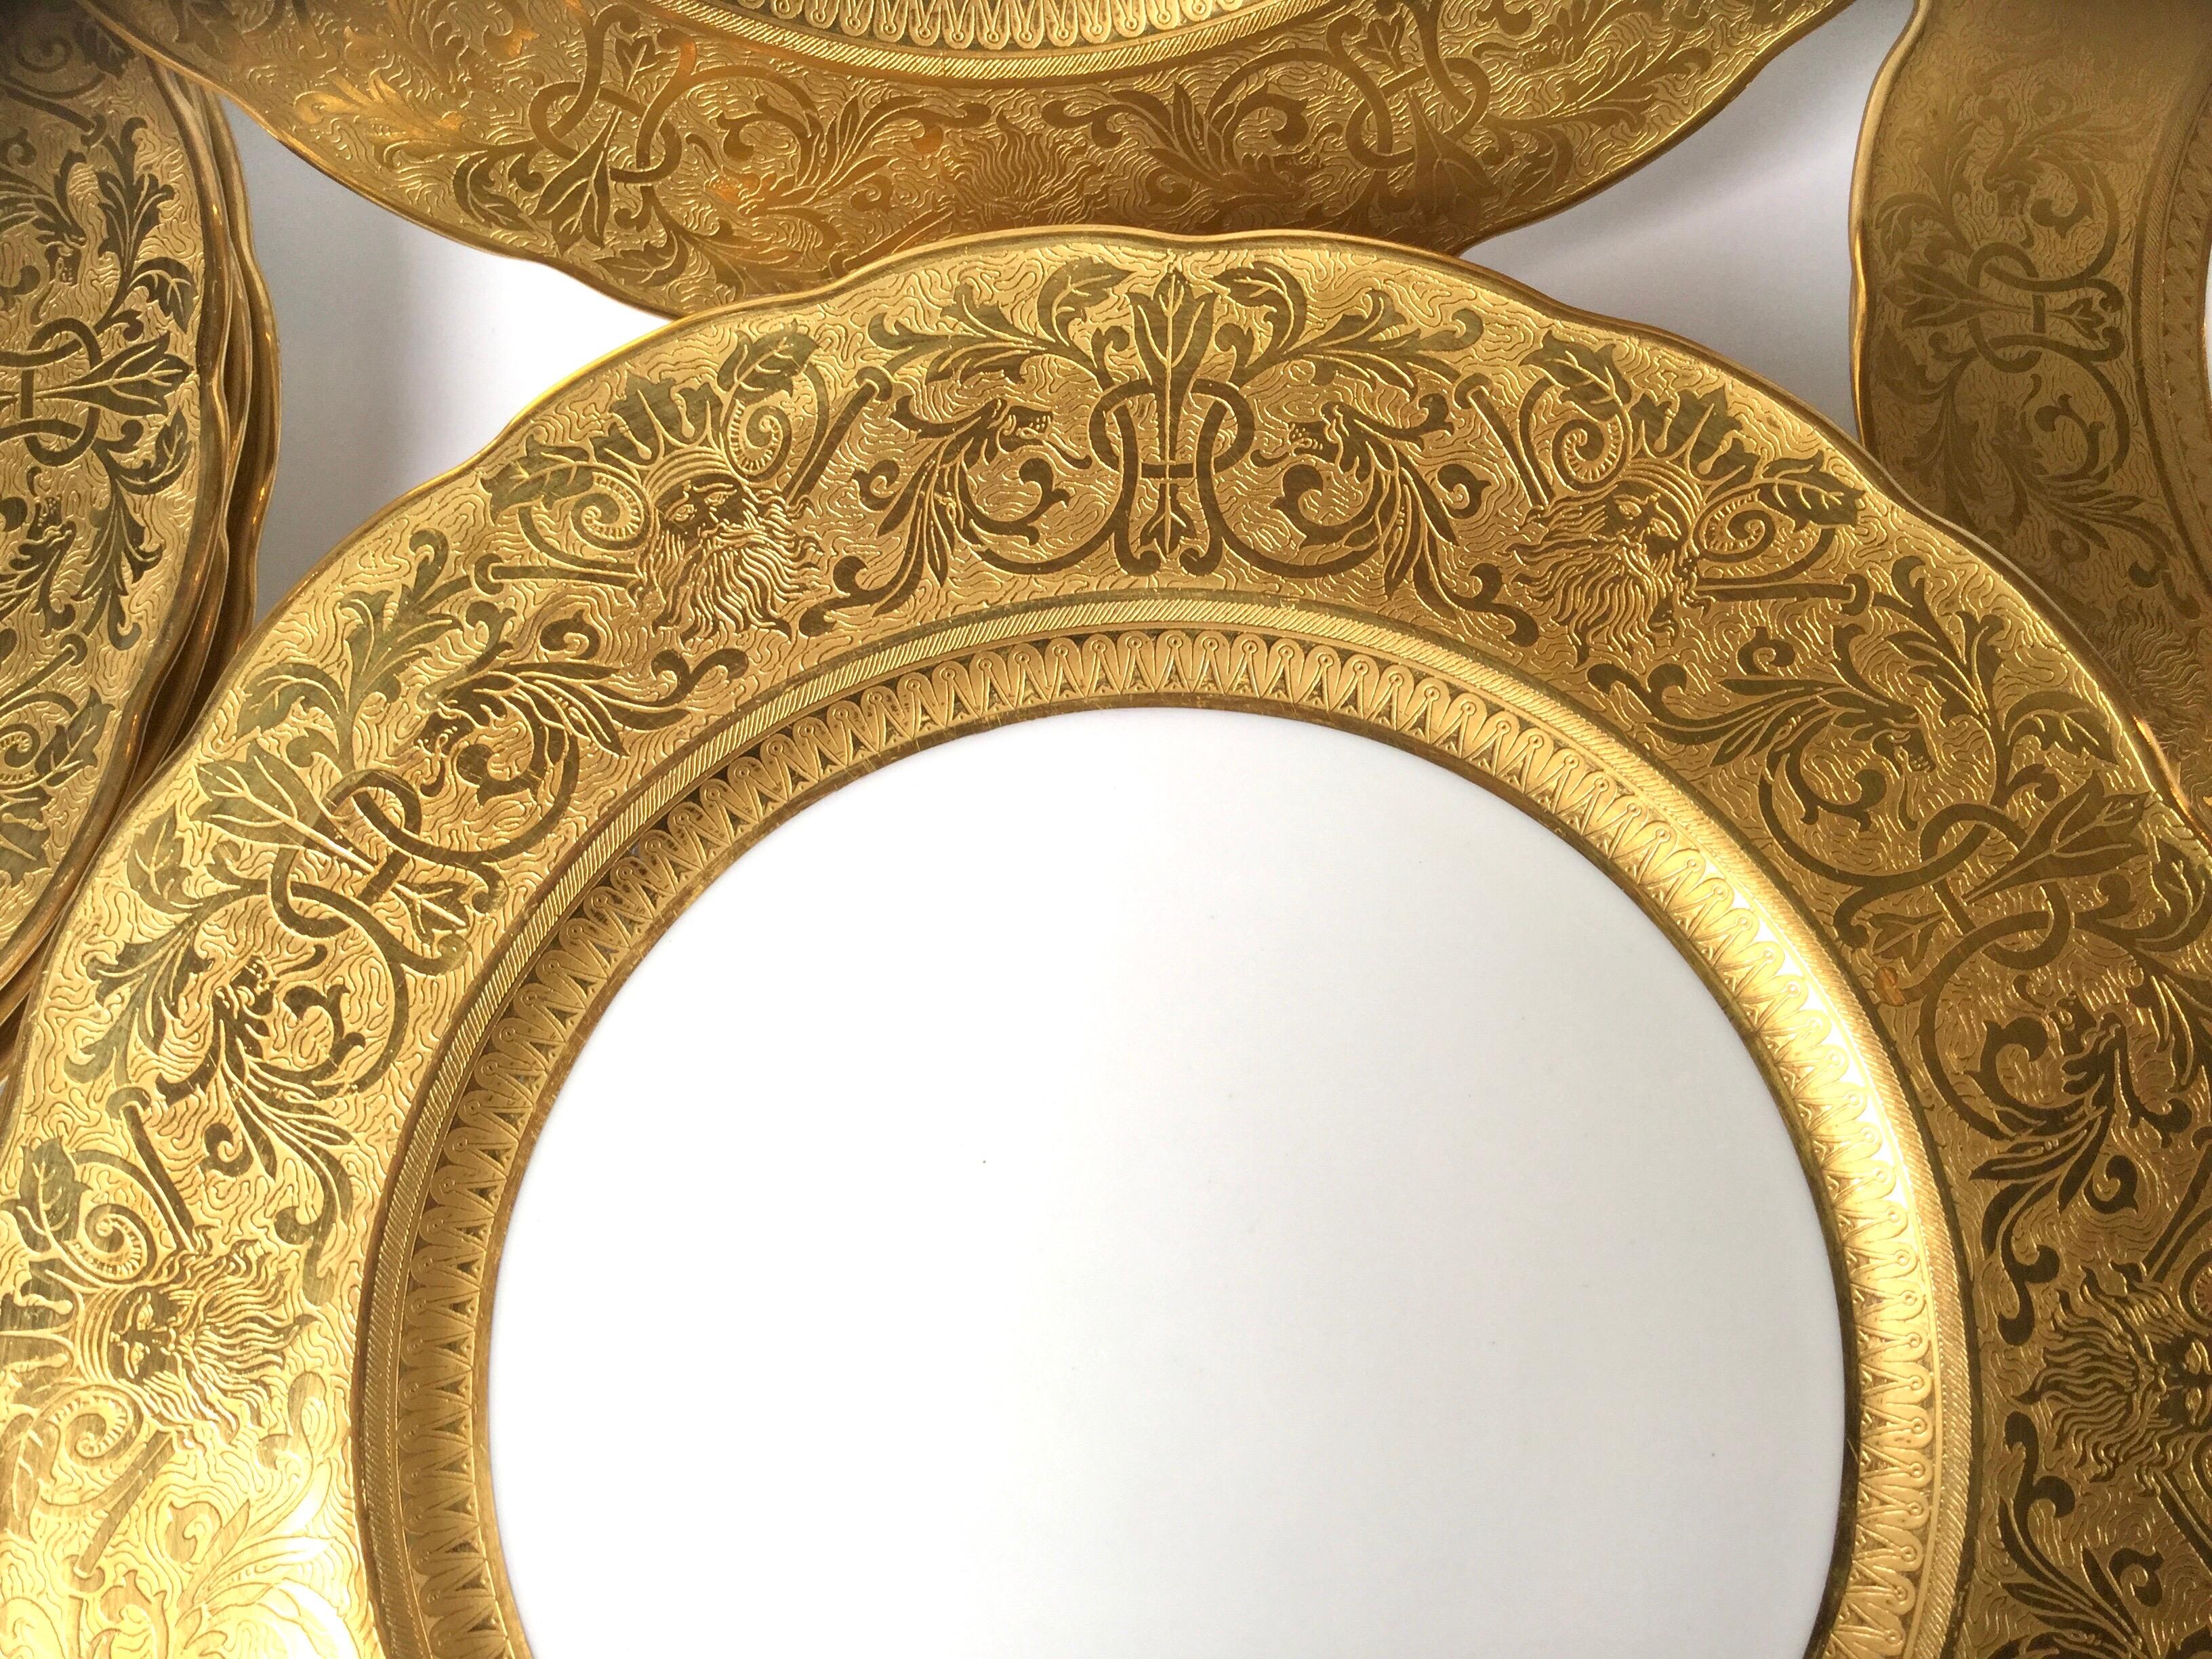 Porcelain Set of Ten Outstanding Gold Embossed Figural Head Service Plates